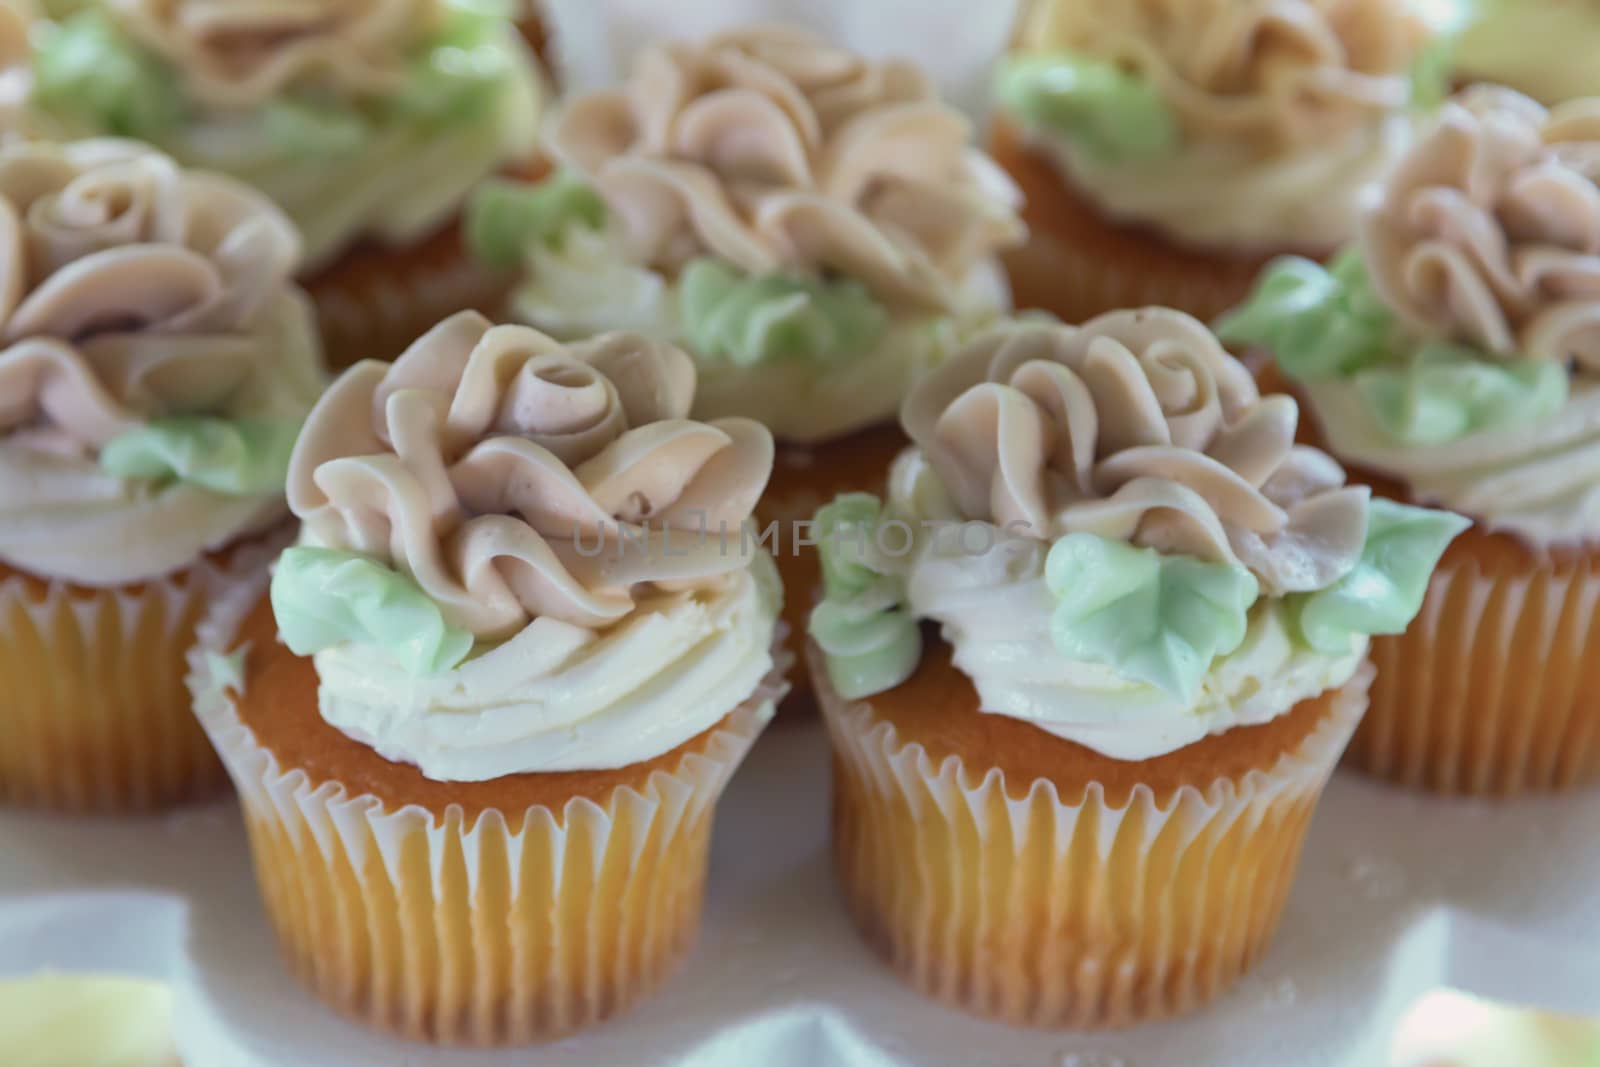 Yummy and delicious buttercream cupcakes with generous amounts of decorative frosting. 